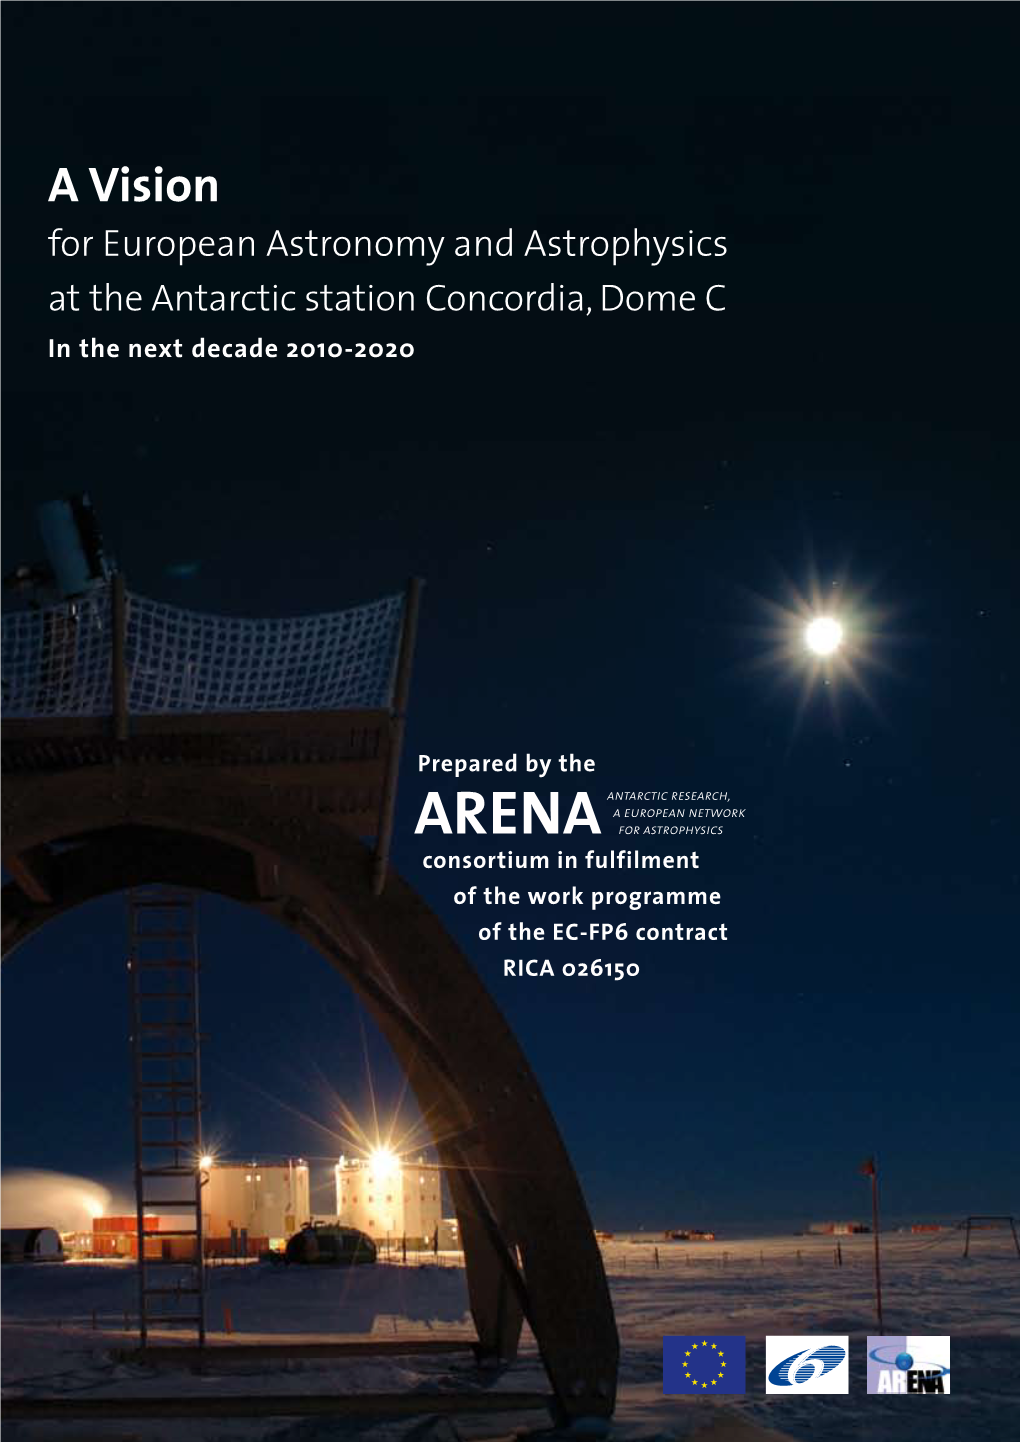 Vision for European Astronomy and Astrophysics at the Antarctic Station Concordia, Dome C in the Next Decade 2010-2020